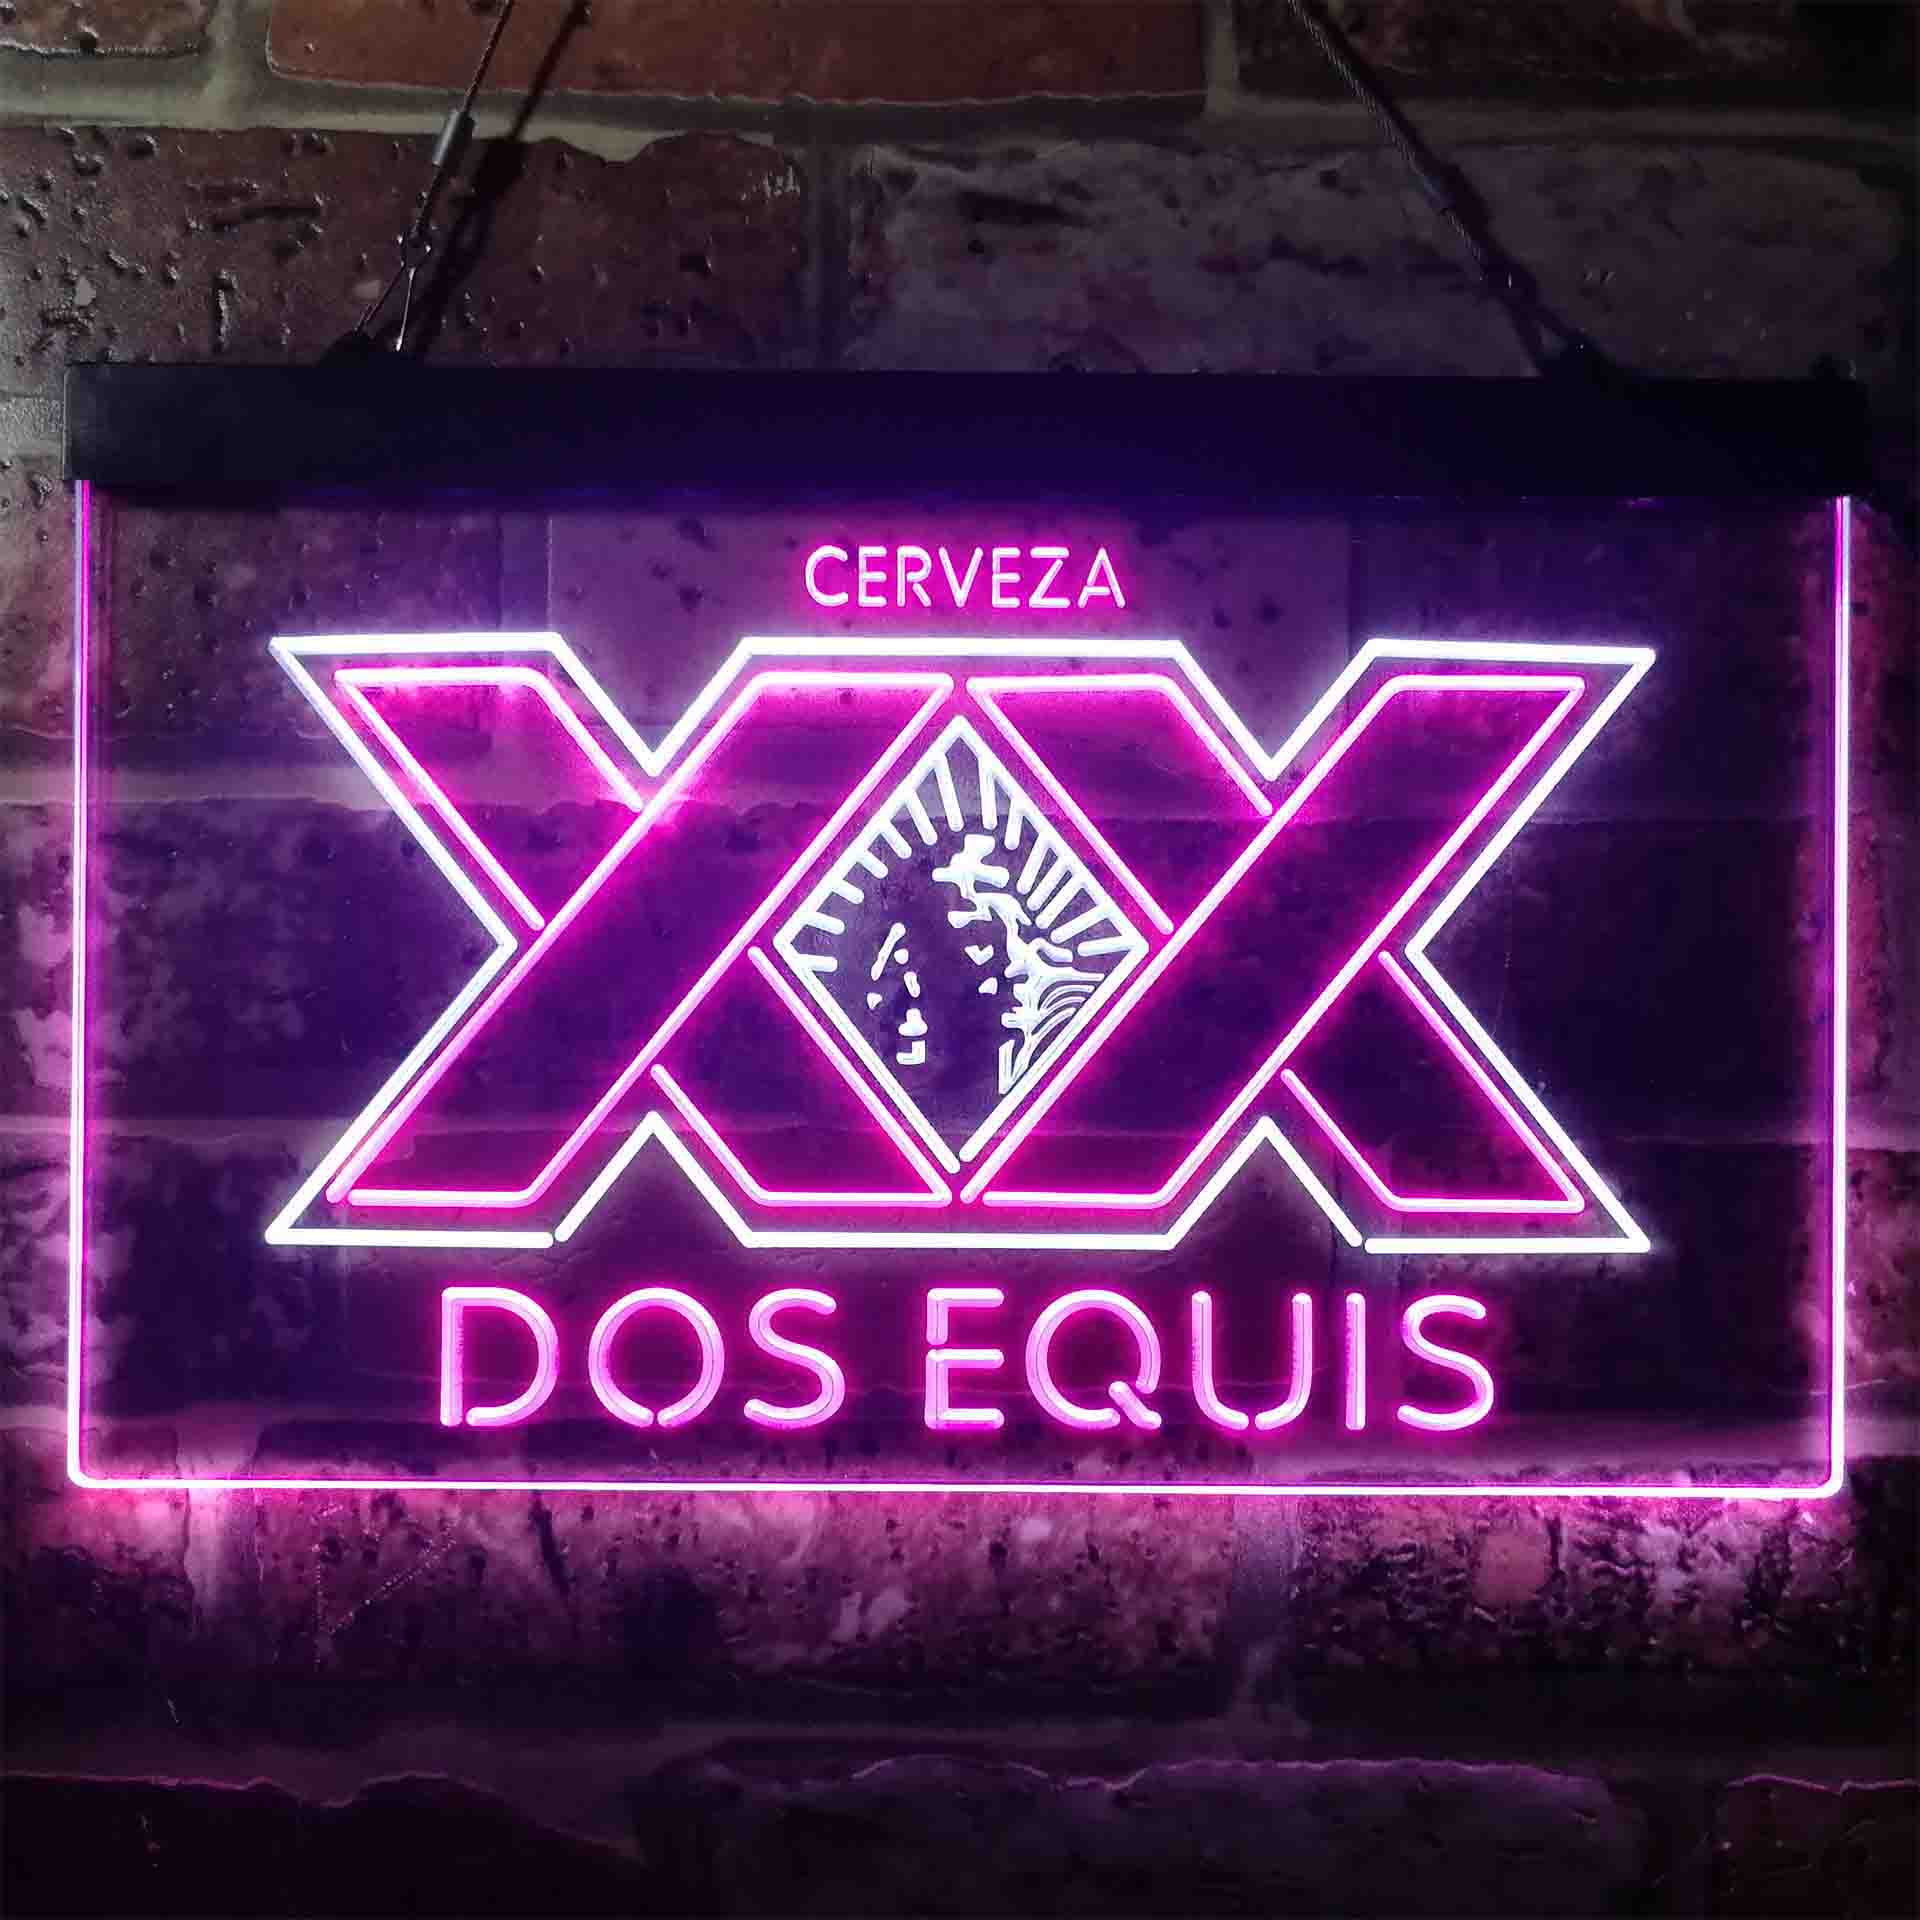 XX Dos Equis Beer Neon-Like LED Sign